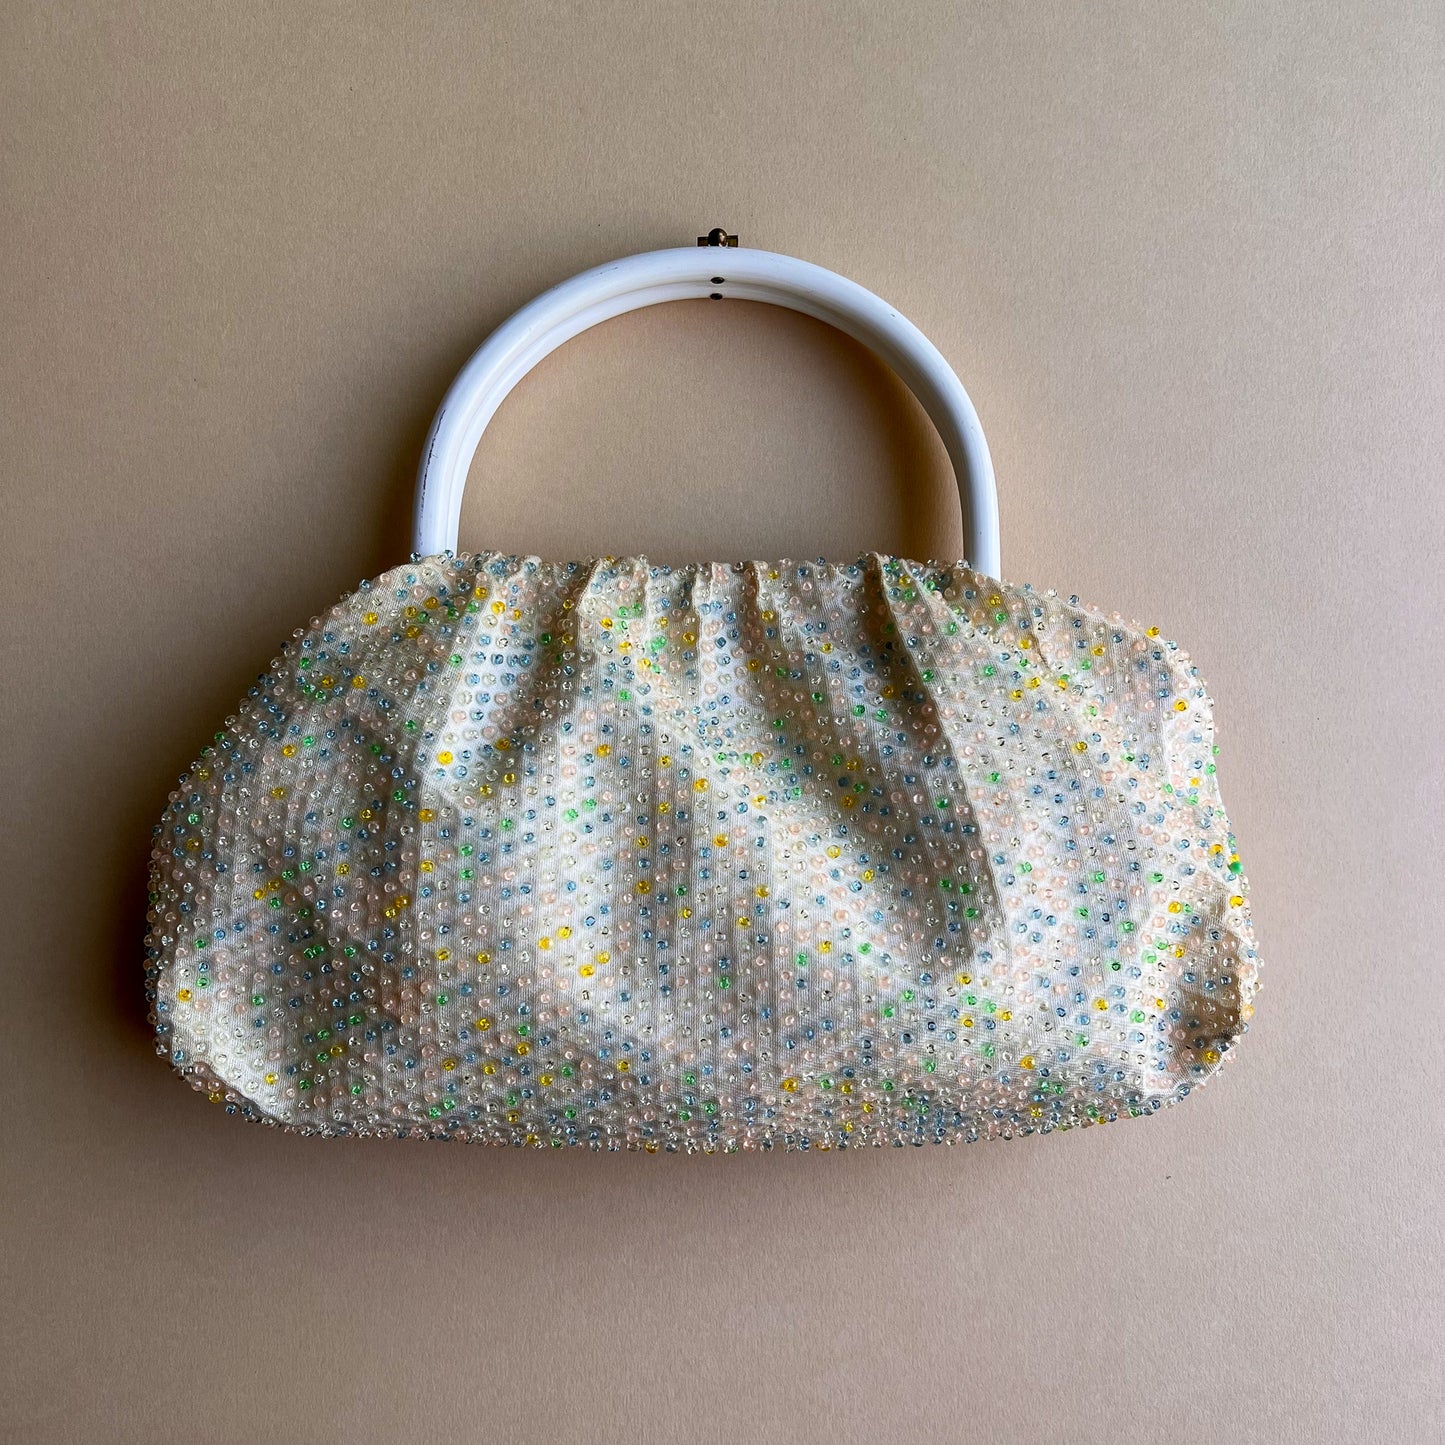 Incredible 1960s Reversible White and Candy-Colored Beaded Handbag